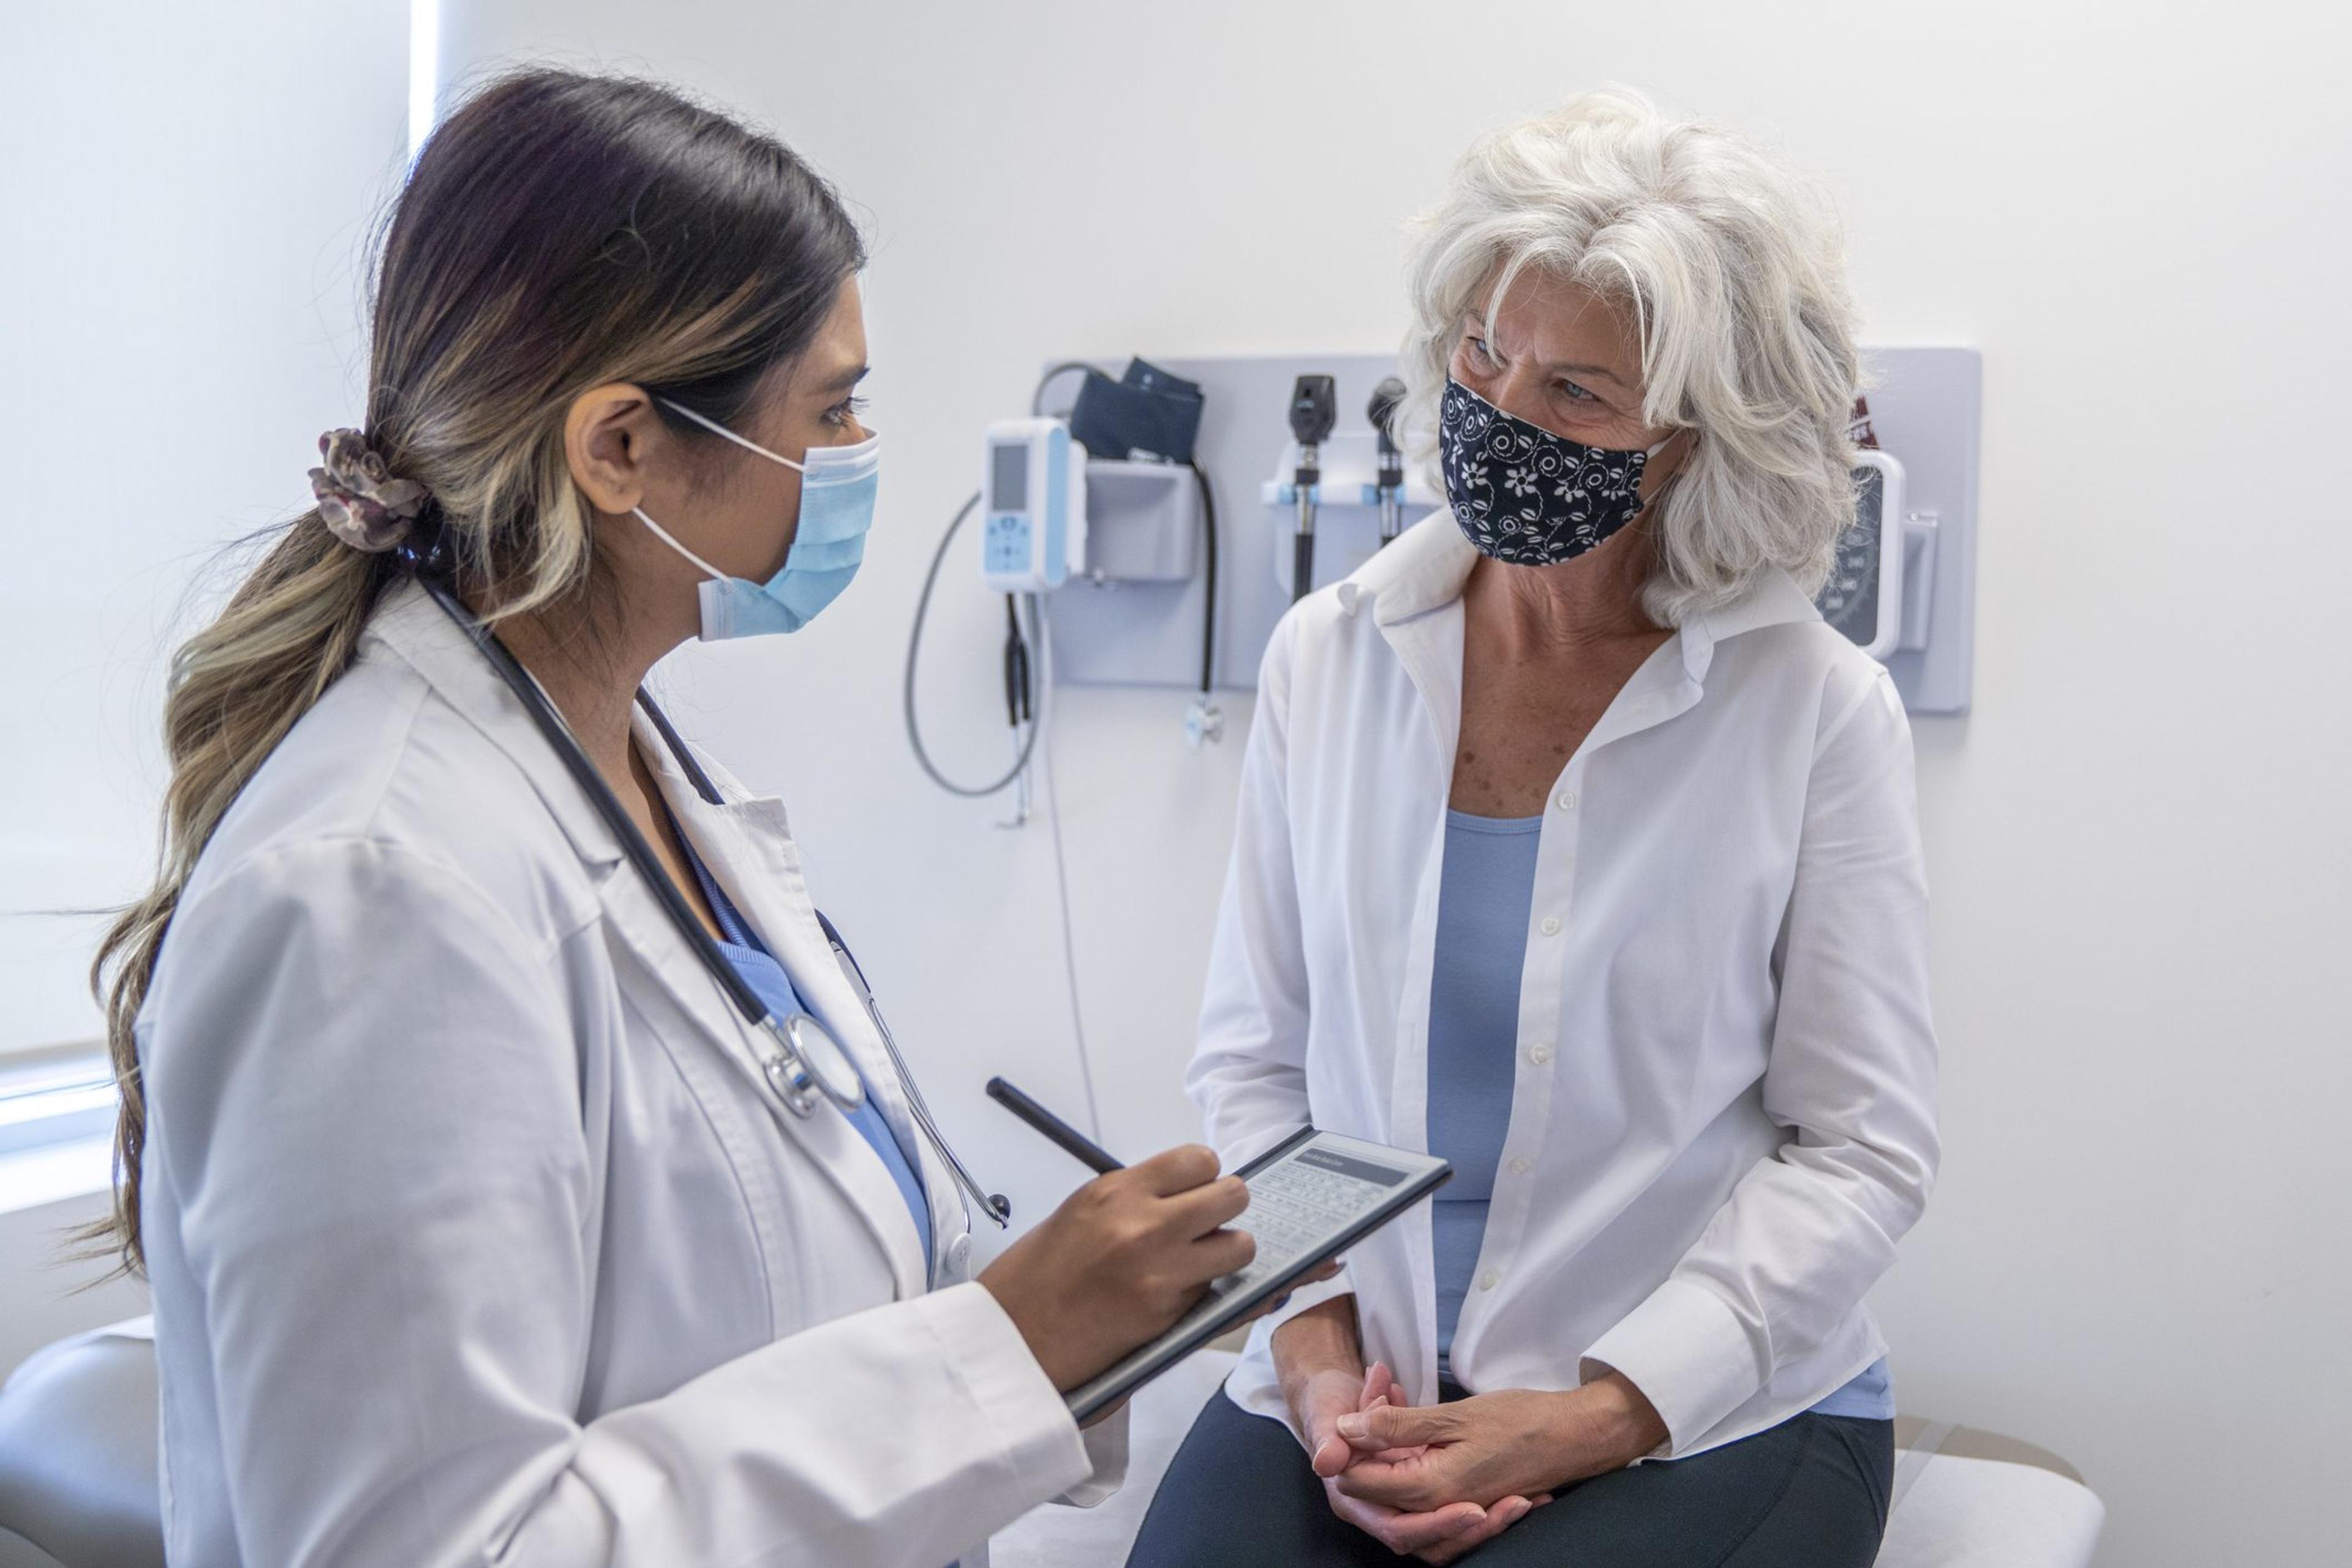 Masked senior woman listening to her doctor during a check up appointment talk about pain scale